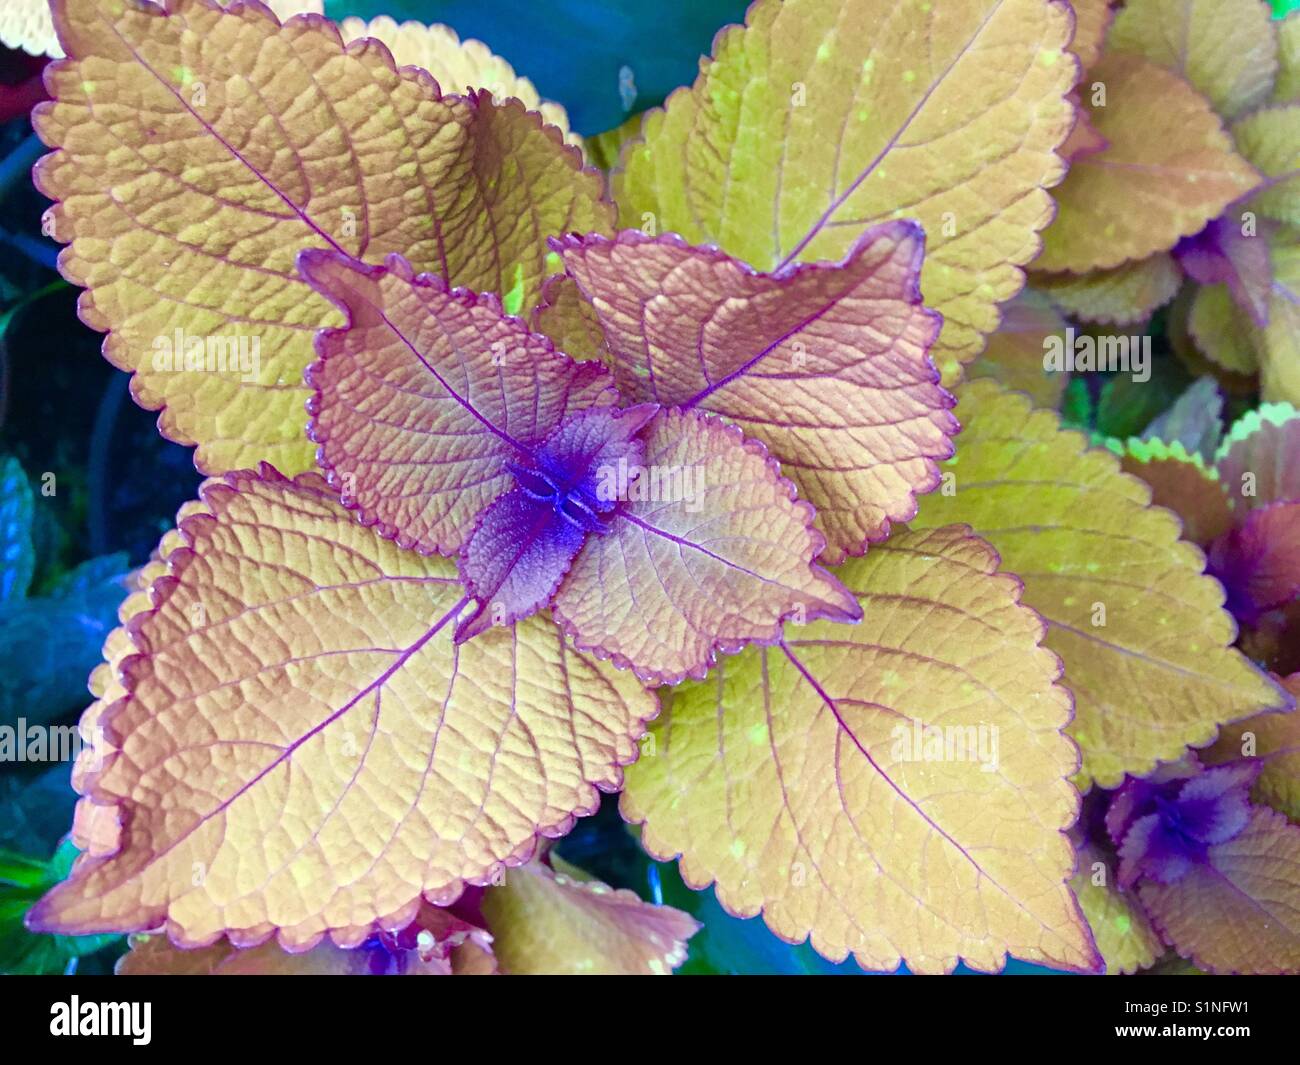 Colourful plant with purple and green Stock Photo